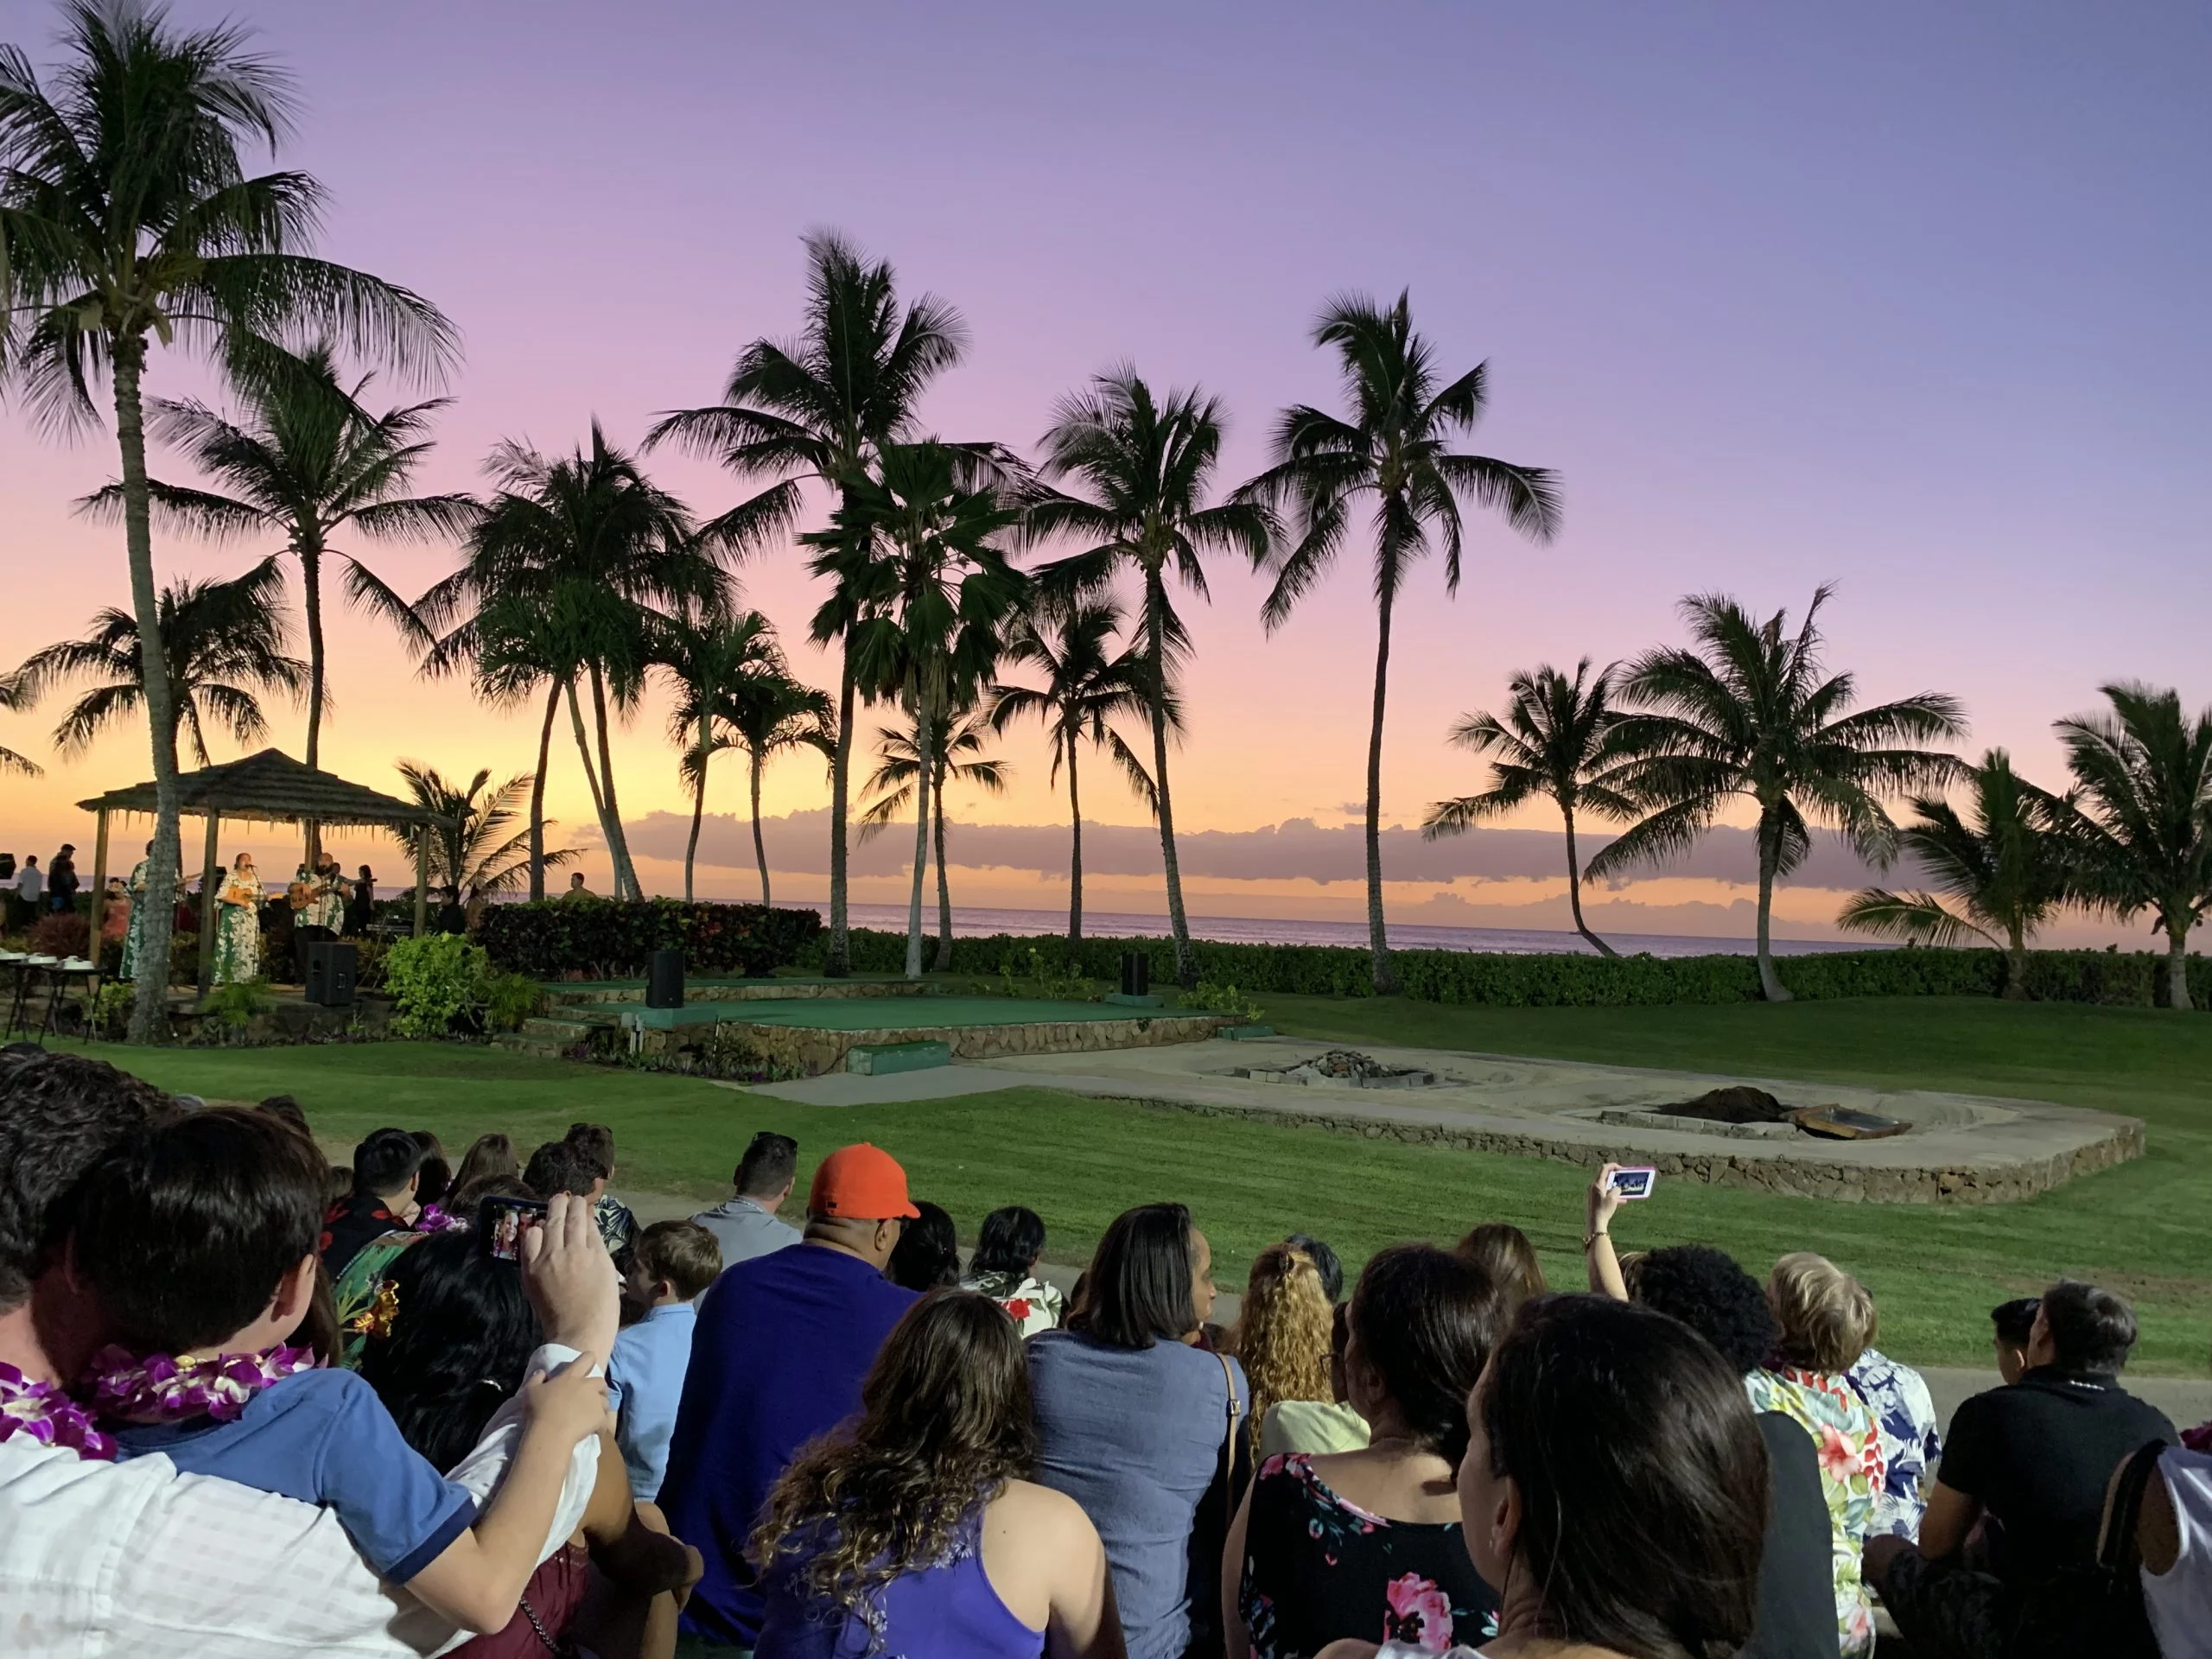 The Best Hawaii Itinerary - Sharing the best Hawaii itinerary, including what to see and where to eat, that includes three islands over two weeks! | Hawaii Itinerary - Hawaii Vacation Itinerary - Hawaii Planning Guide - 3 Hawaiian Island Itinerary - 10 Day Hawaii Itinerary 